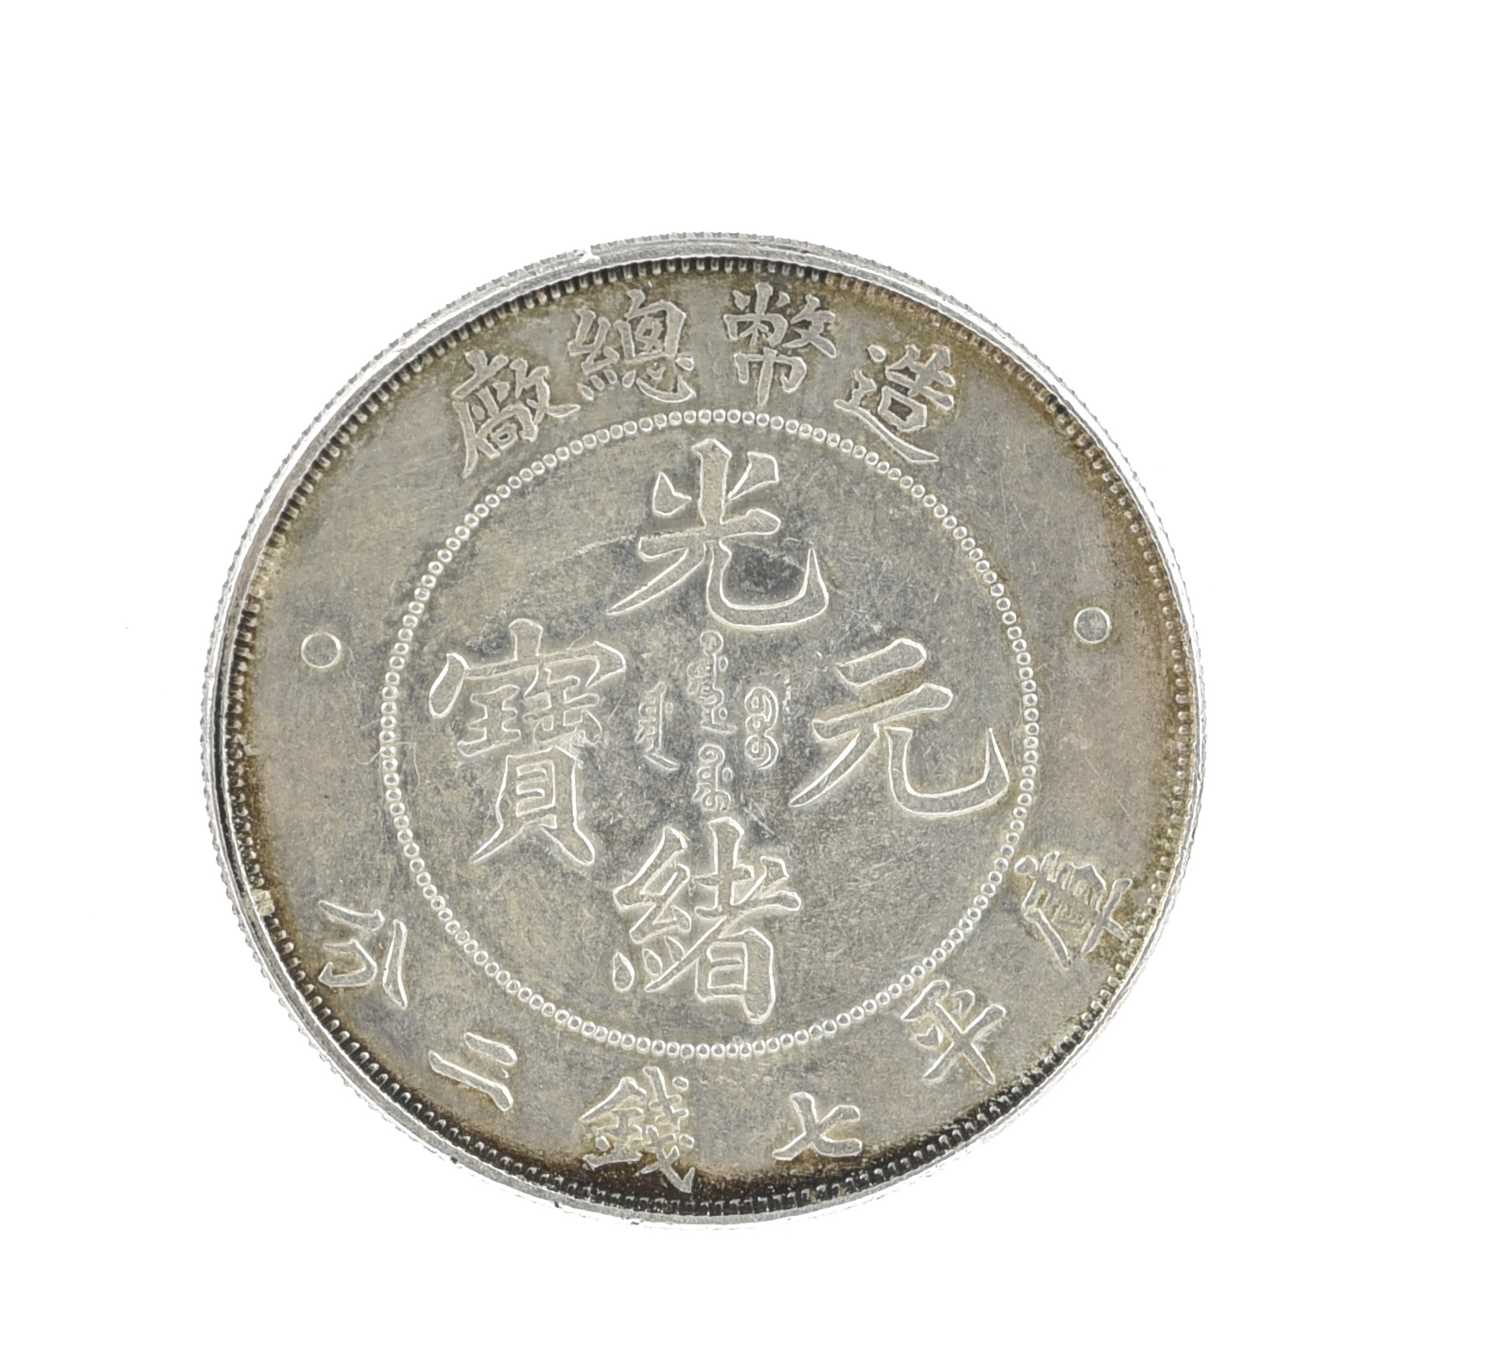 China - Empire: Guangxu, silver dollar, undated (1908), general unified coinage (KM Y14), about - Image 2 of 2